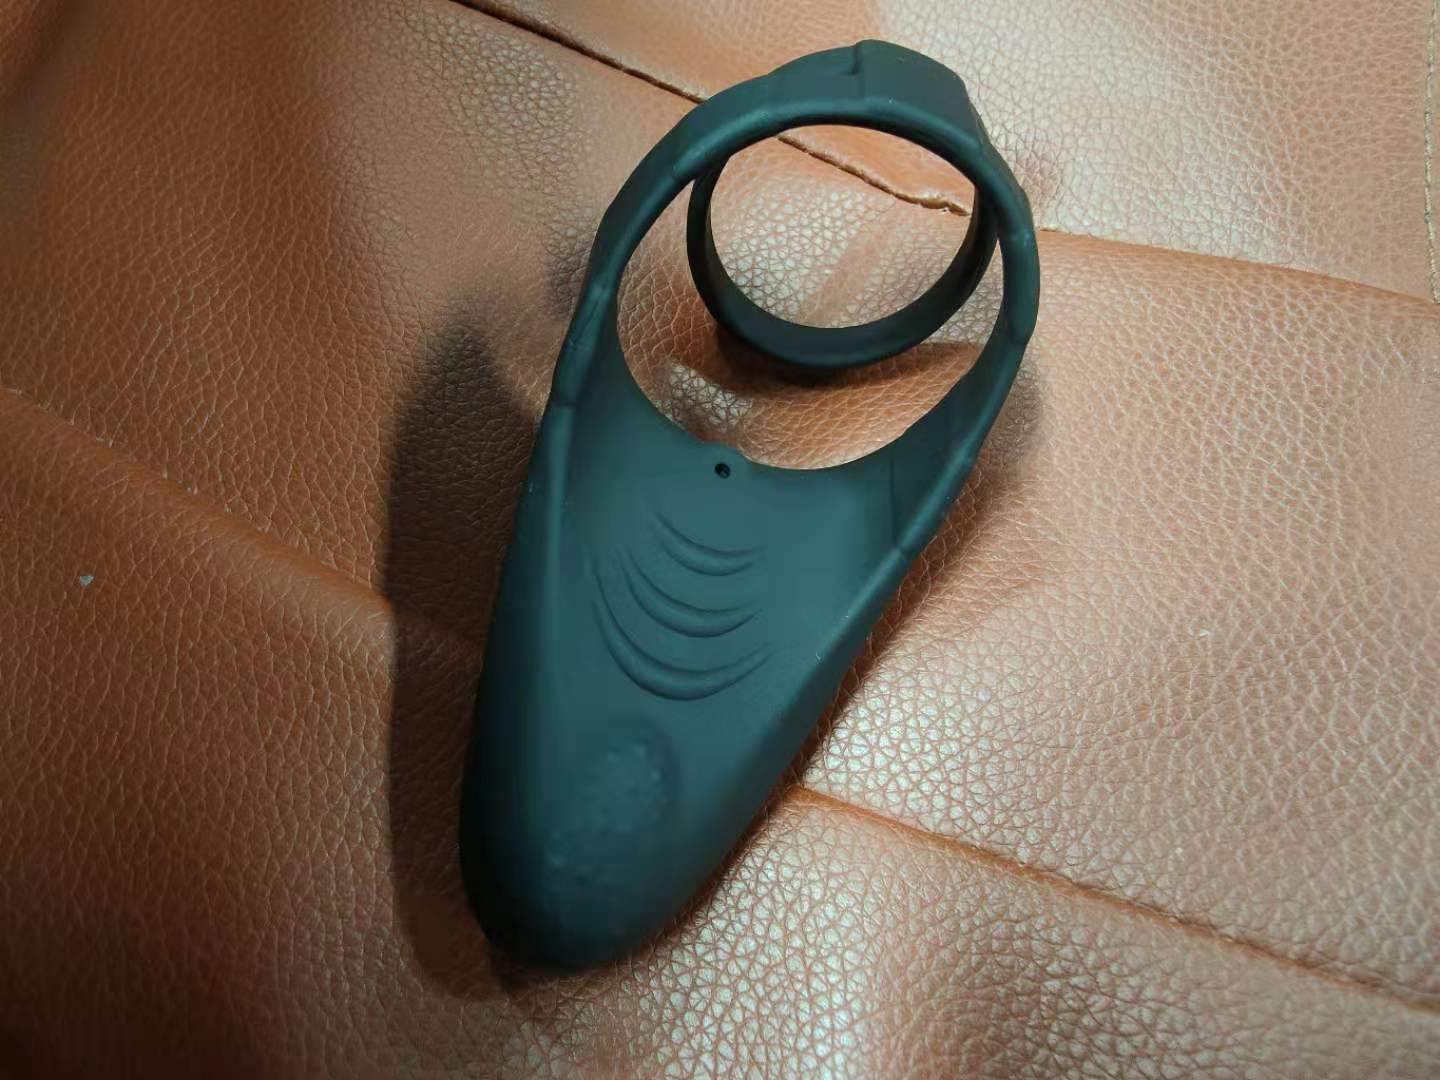 10 Vibration Modes Double Penis Ring Vibrator with Taint Teaser photo review